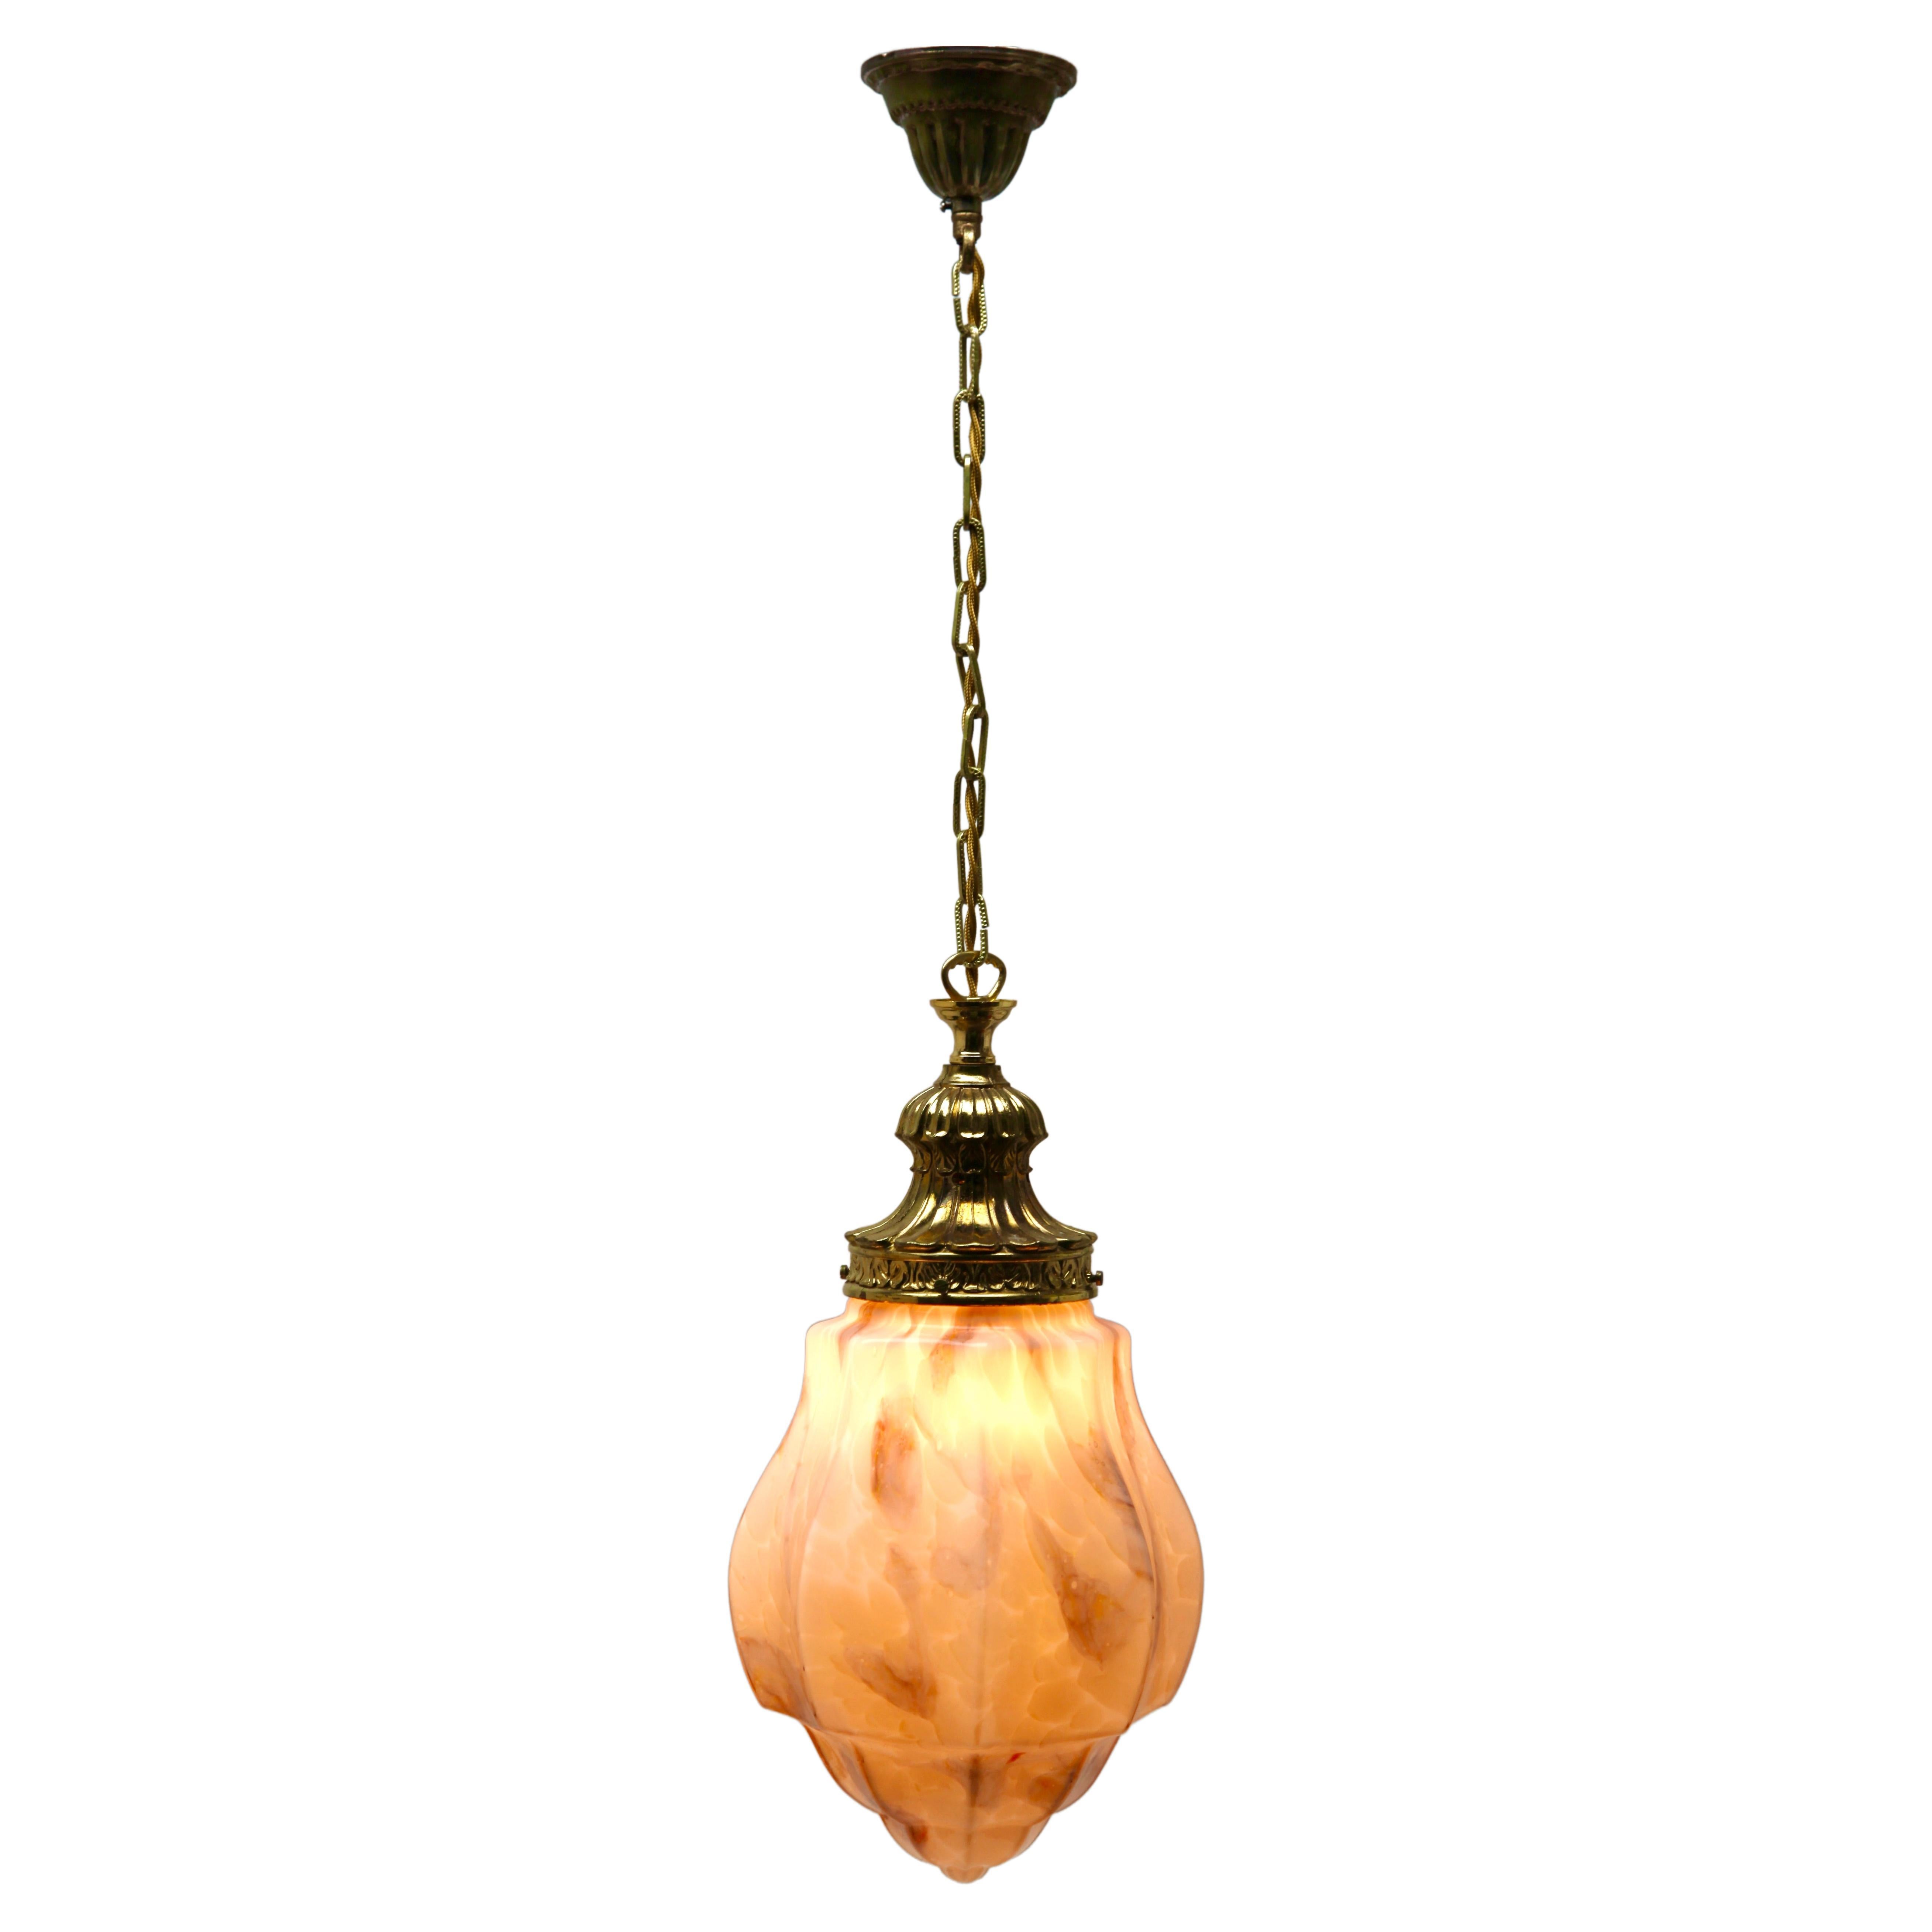 Scailmont Pendant Lamp with a Opaline Shade and Brass Fittings, 1930s, Belgium